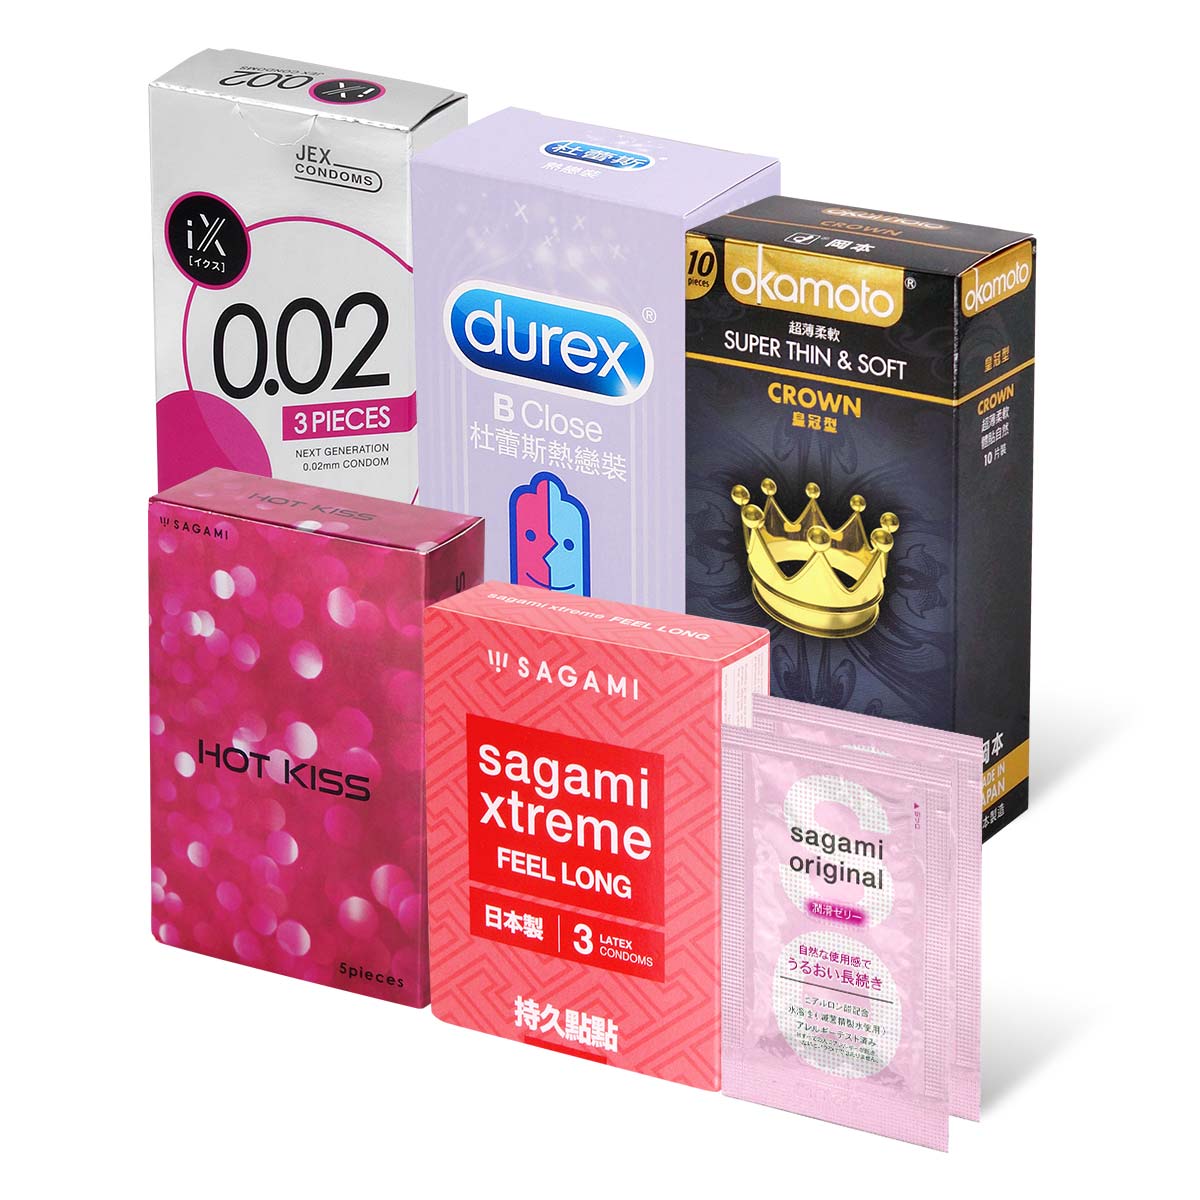 Sampson Recommended Value Type Combo Set 33 pieces condom-p_1